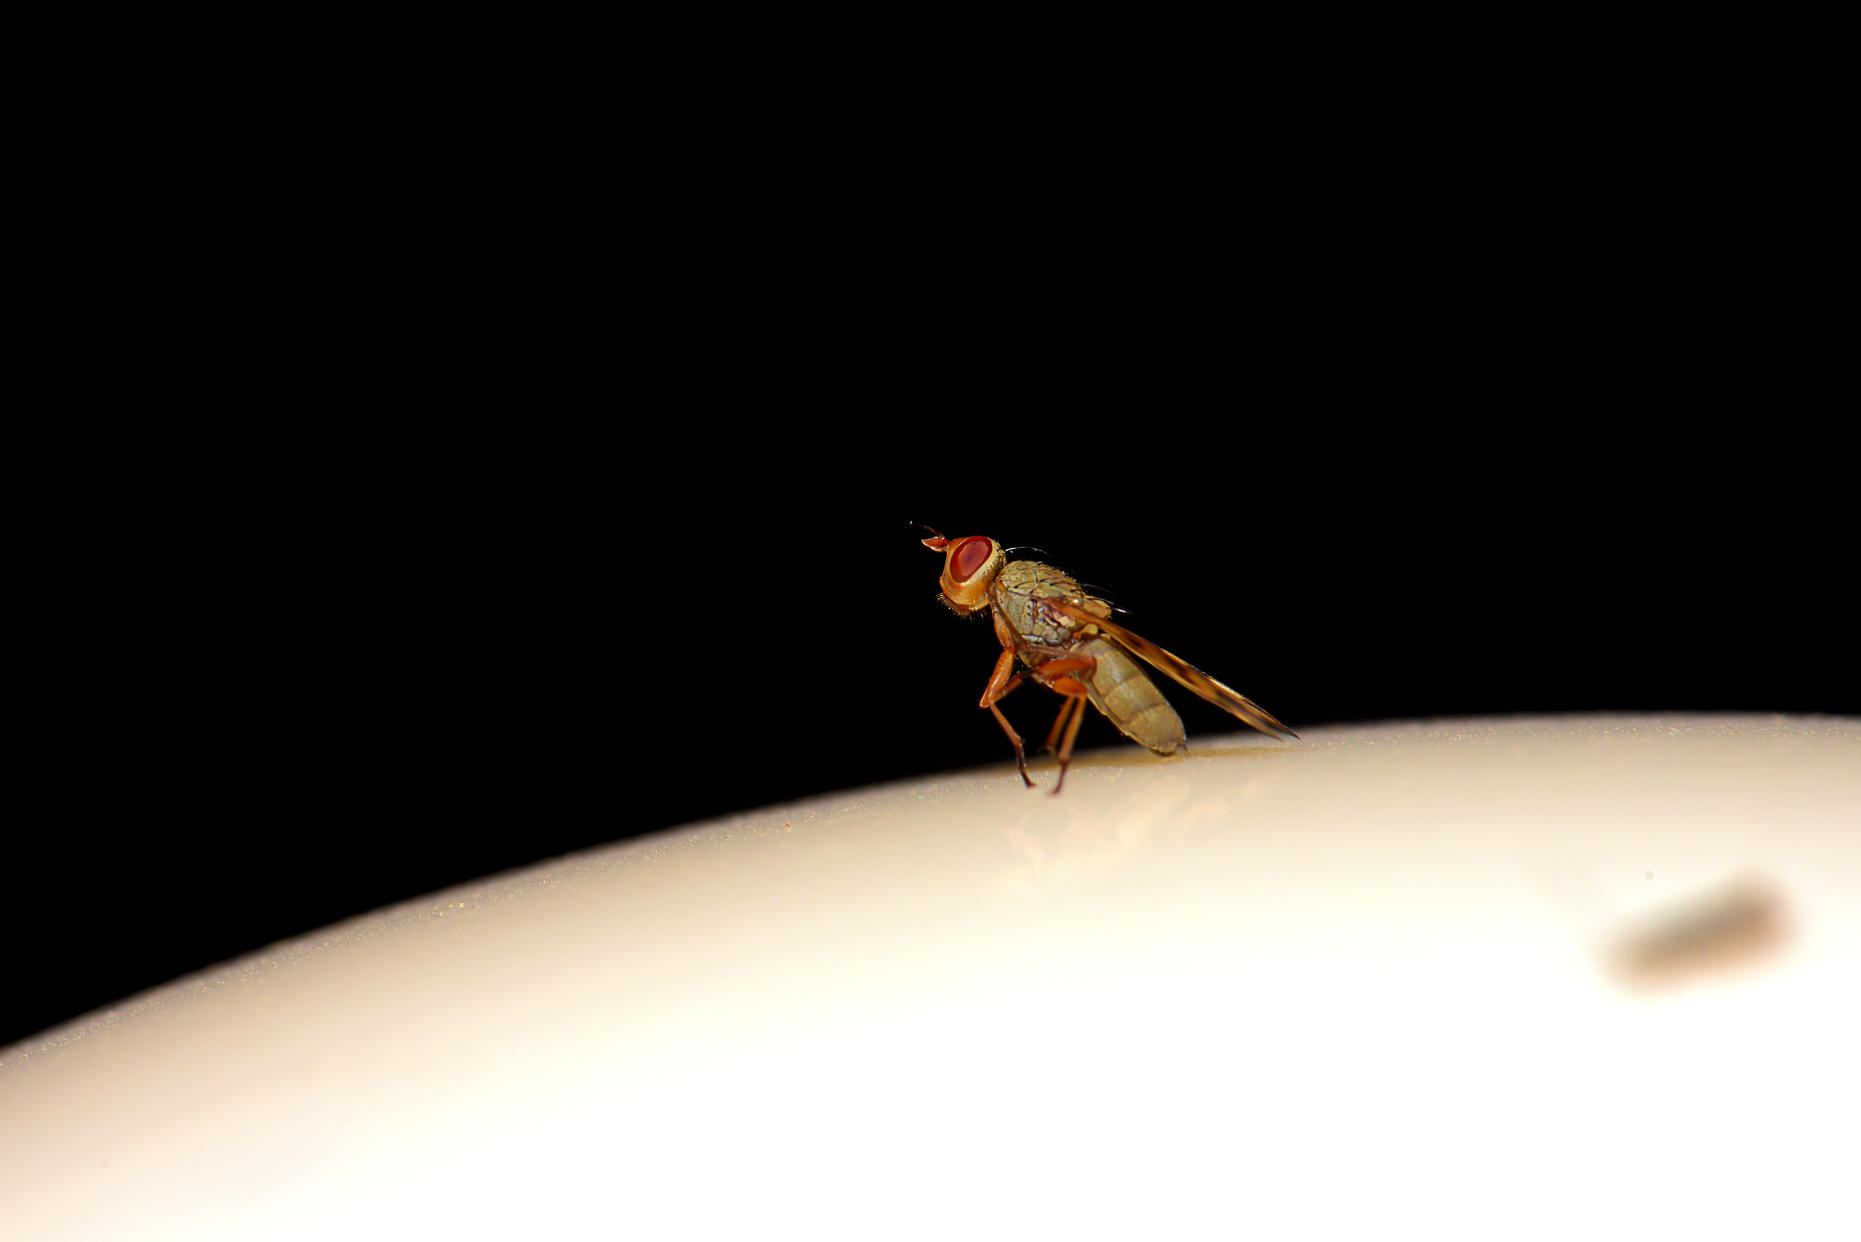 Drosophila, one of the most common fruit flies, on a black background. 